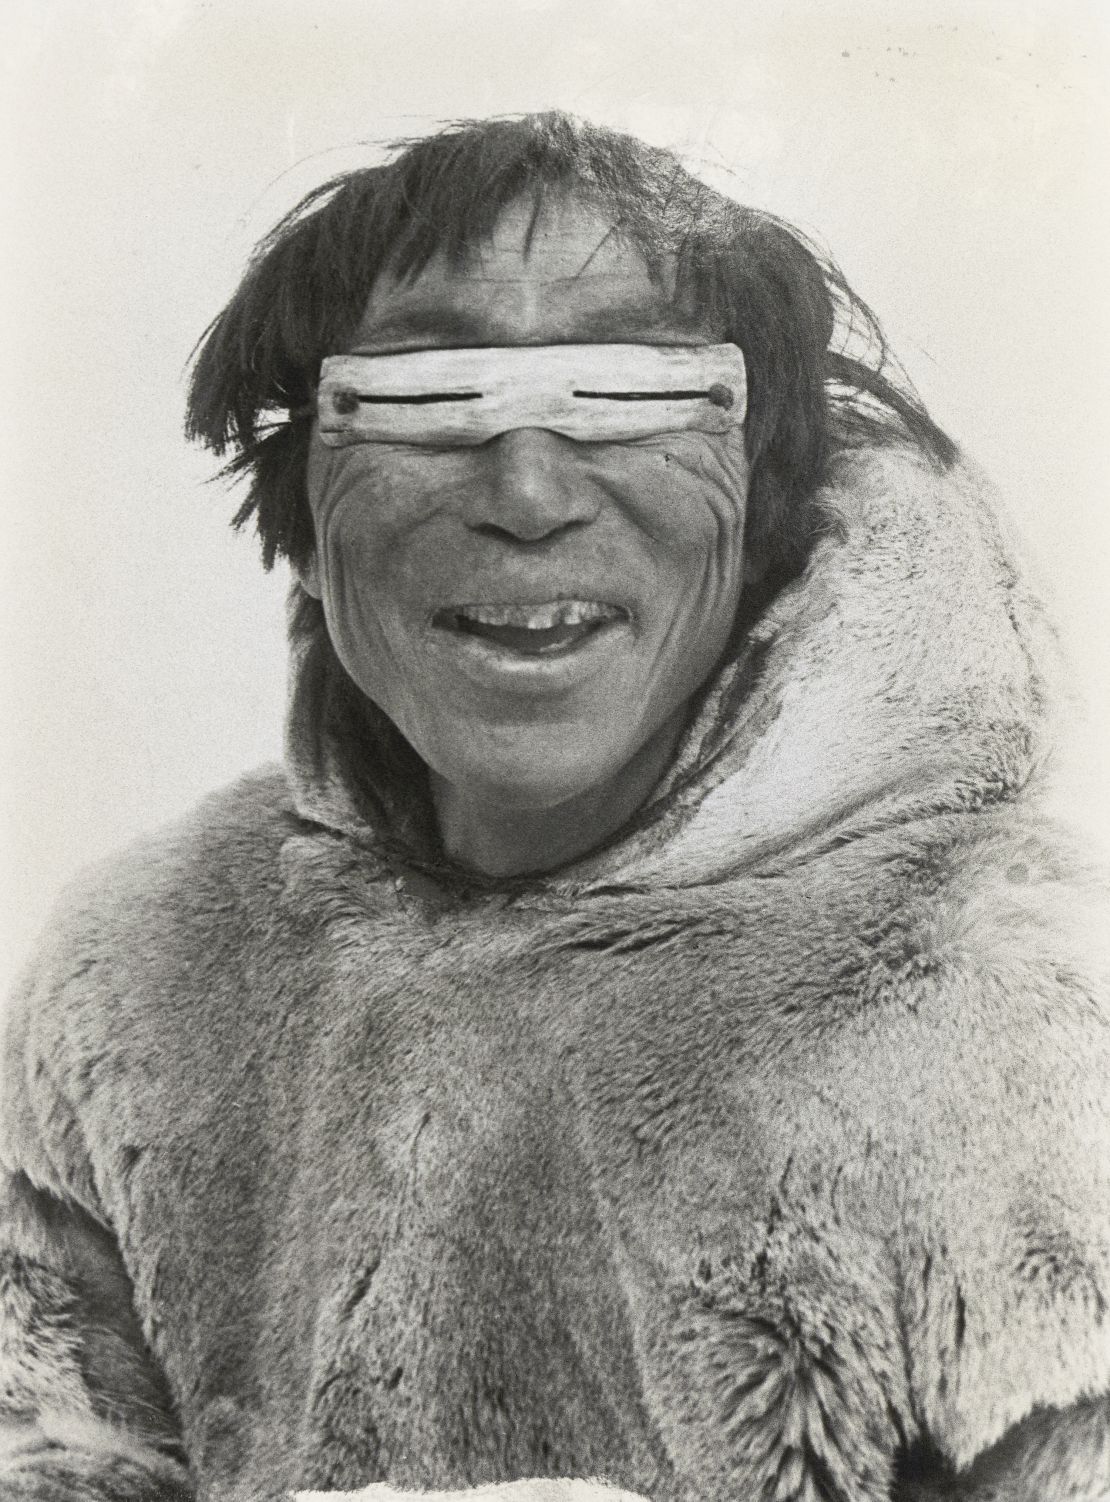 UNSPECIFIED - MAY 25: Inuit (Eskimo) with snow goggles, 20th century. Yellowknife, Prince Of Wales Northern Heritage Centre (Photo by DeAgostini/Getty Images)